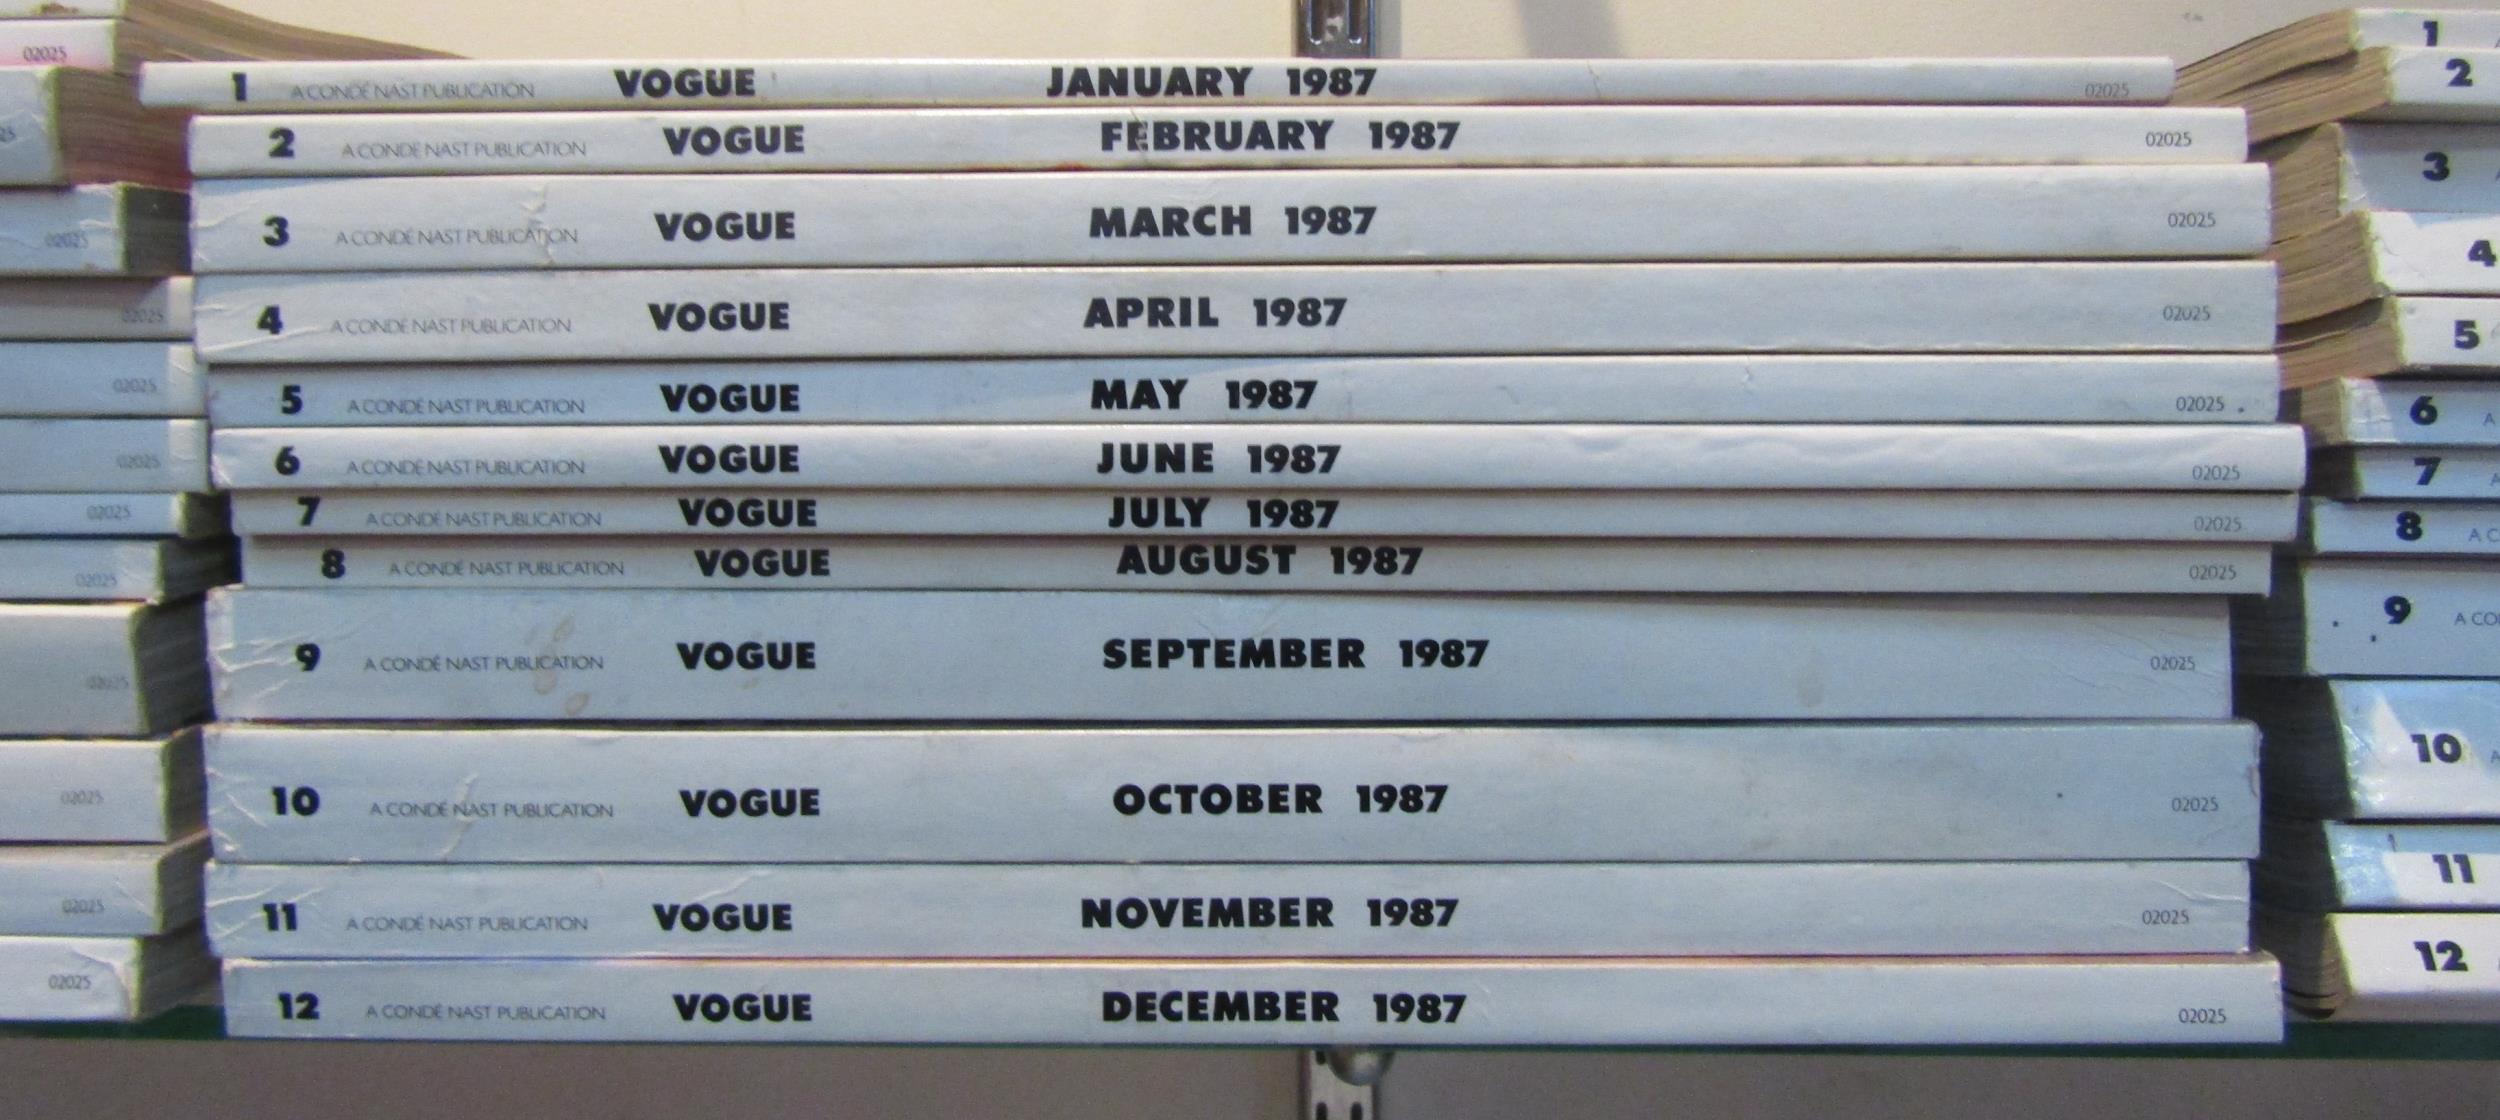 British Vogue magazine 1980 - January (1), February (2), March 1st (3), March 15th (4), April 1st ( - Image 16 of 40